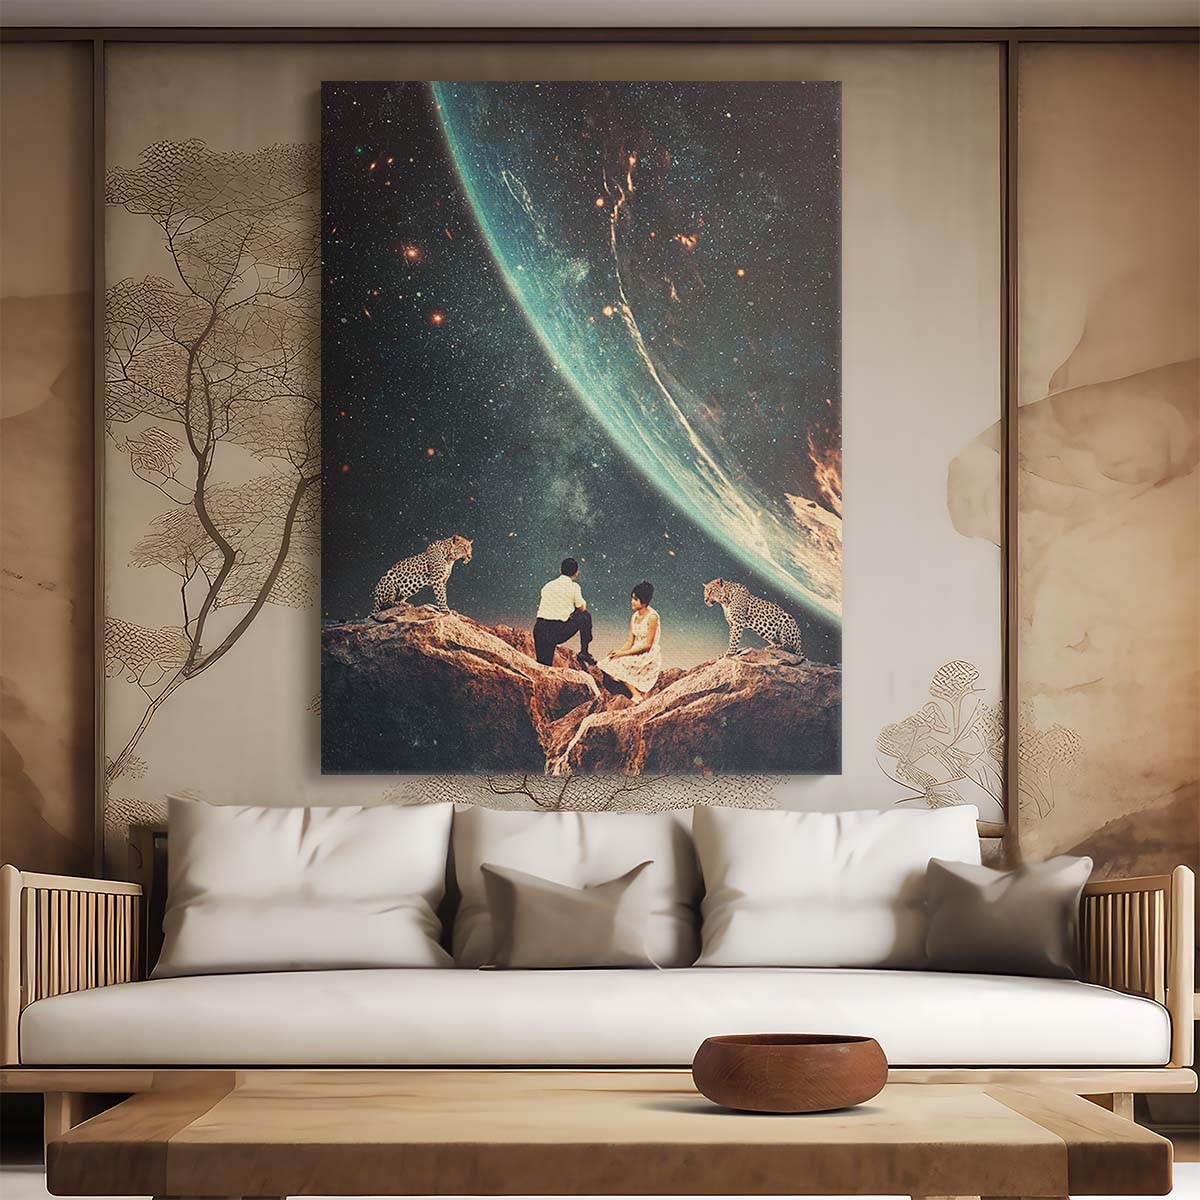 Romantic Retrofuturism Space Illustration Art by Frank Moth by Luxuriance Designs, made in USA